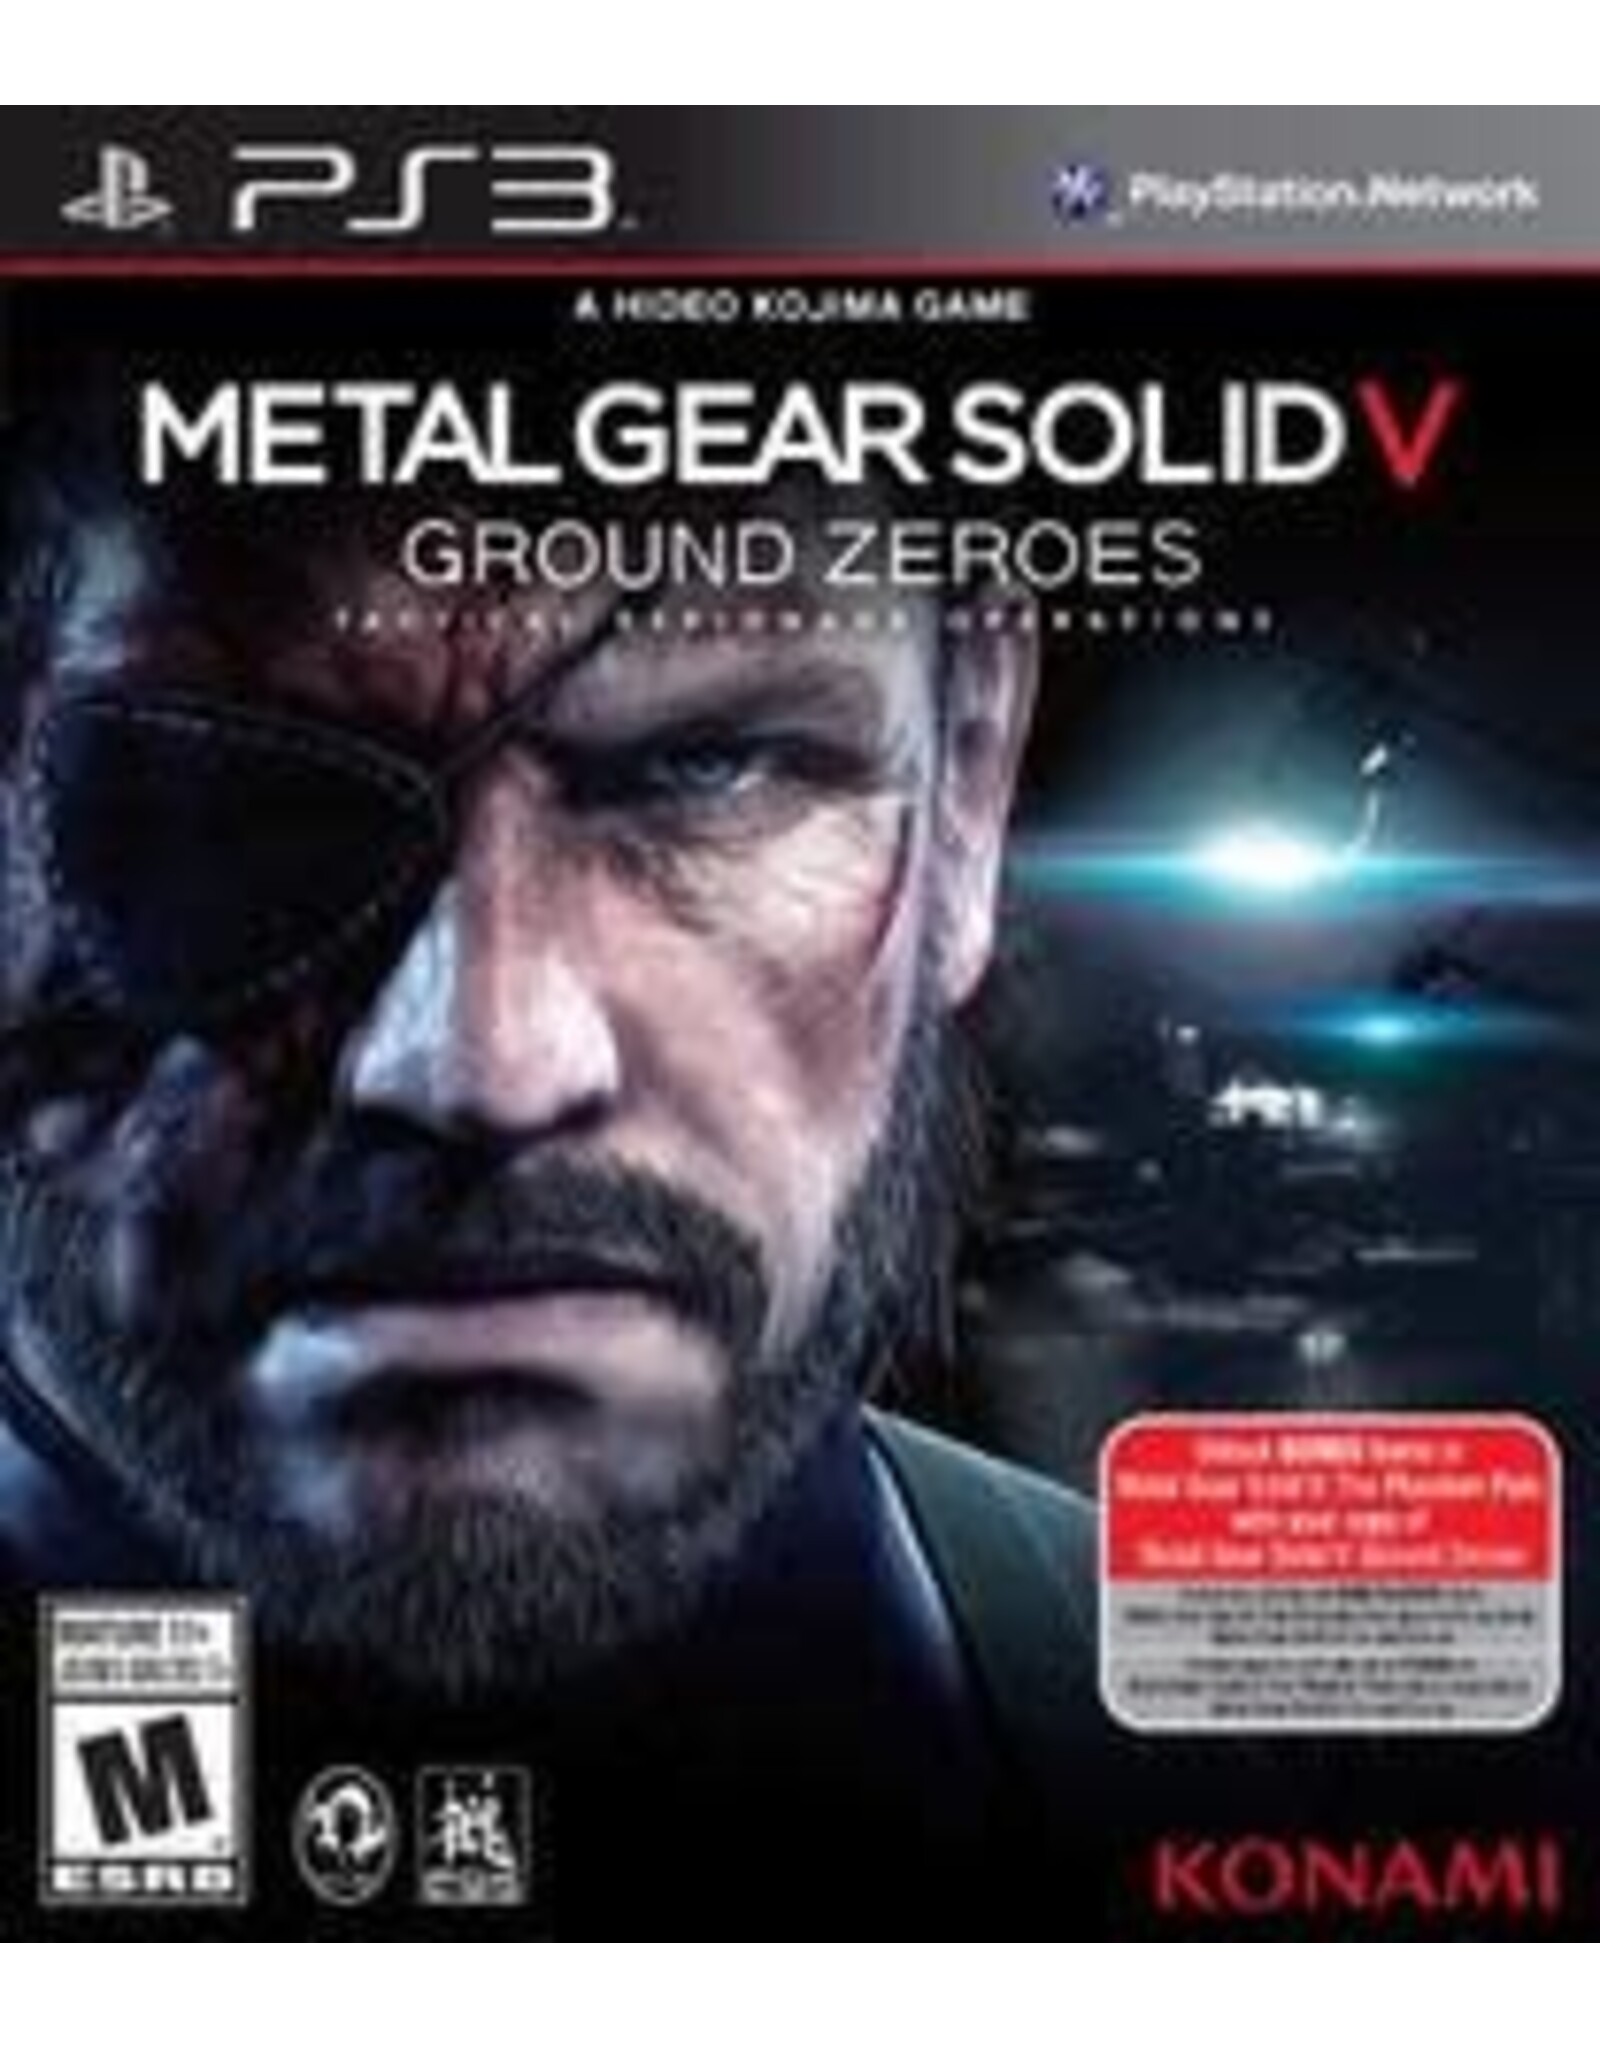 Playstation 3 Metal Gear Solid V: Ground Zeroes (Used, Cosmetic Damage)